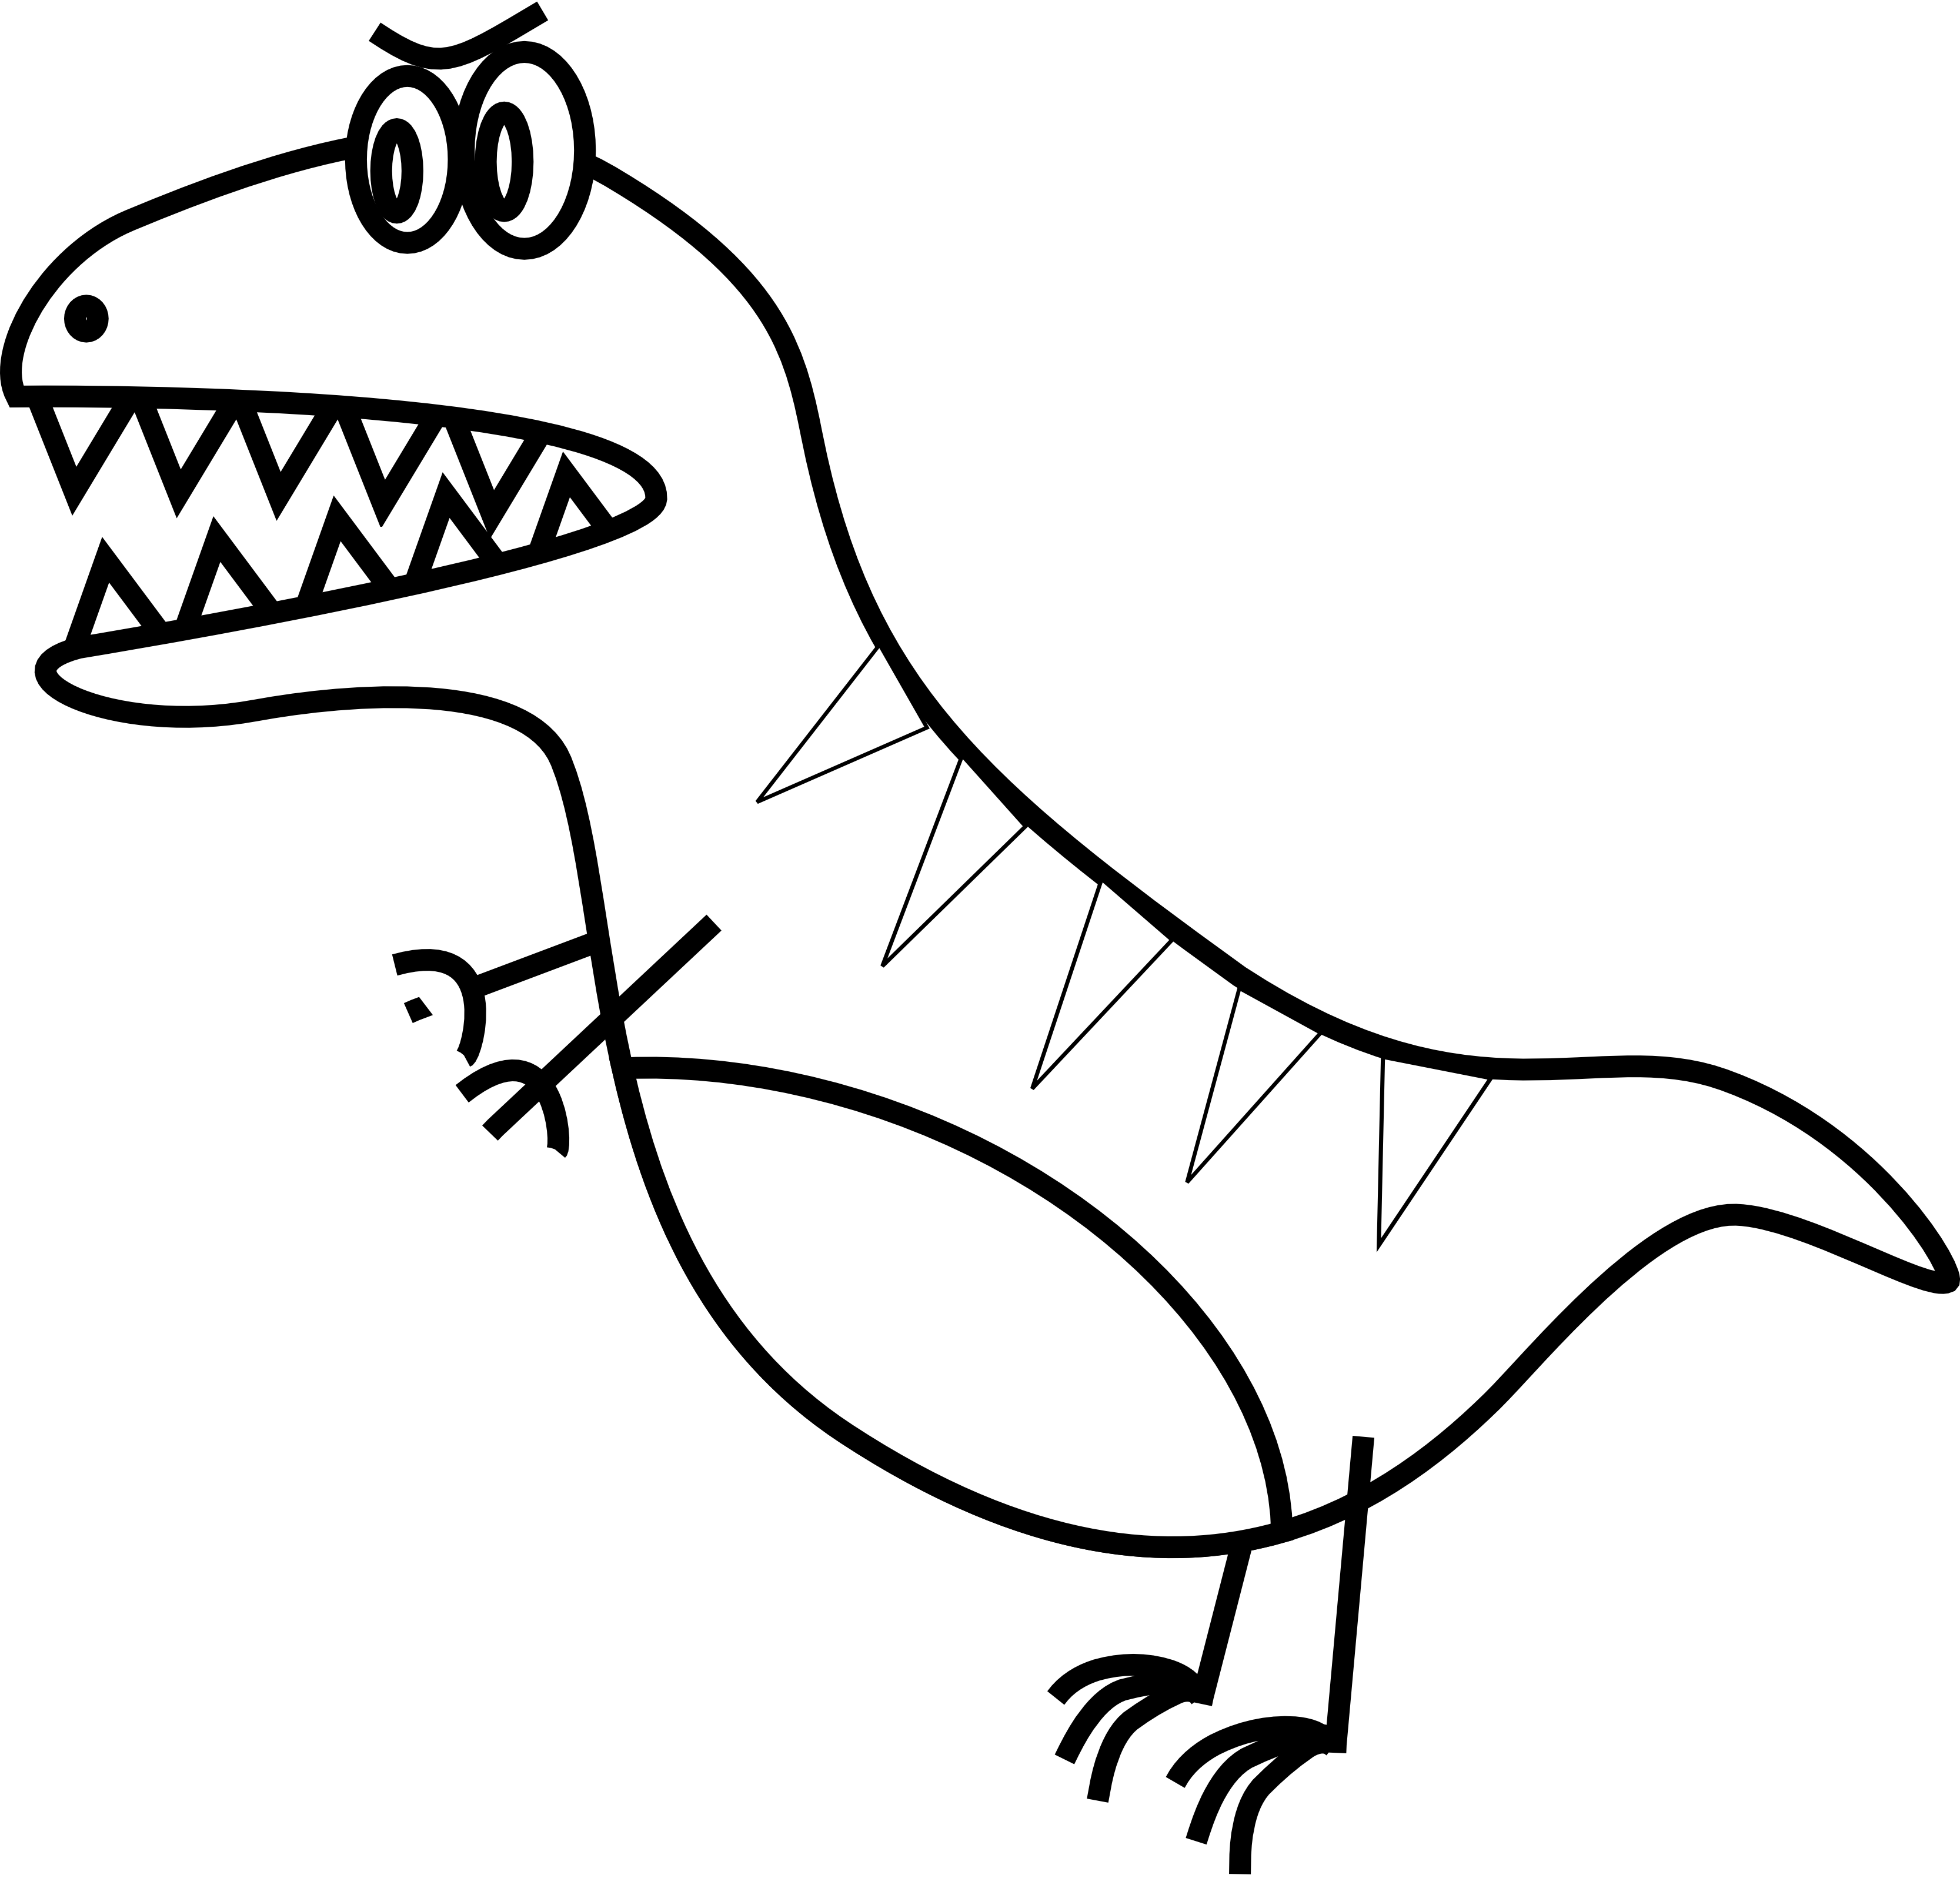 Simple t rex miscellaneous. Pajamas clipart black and white